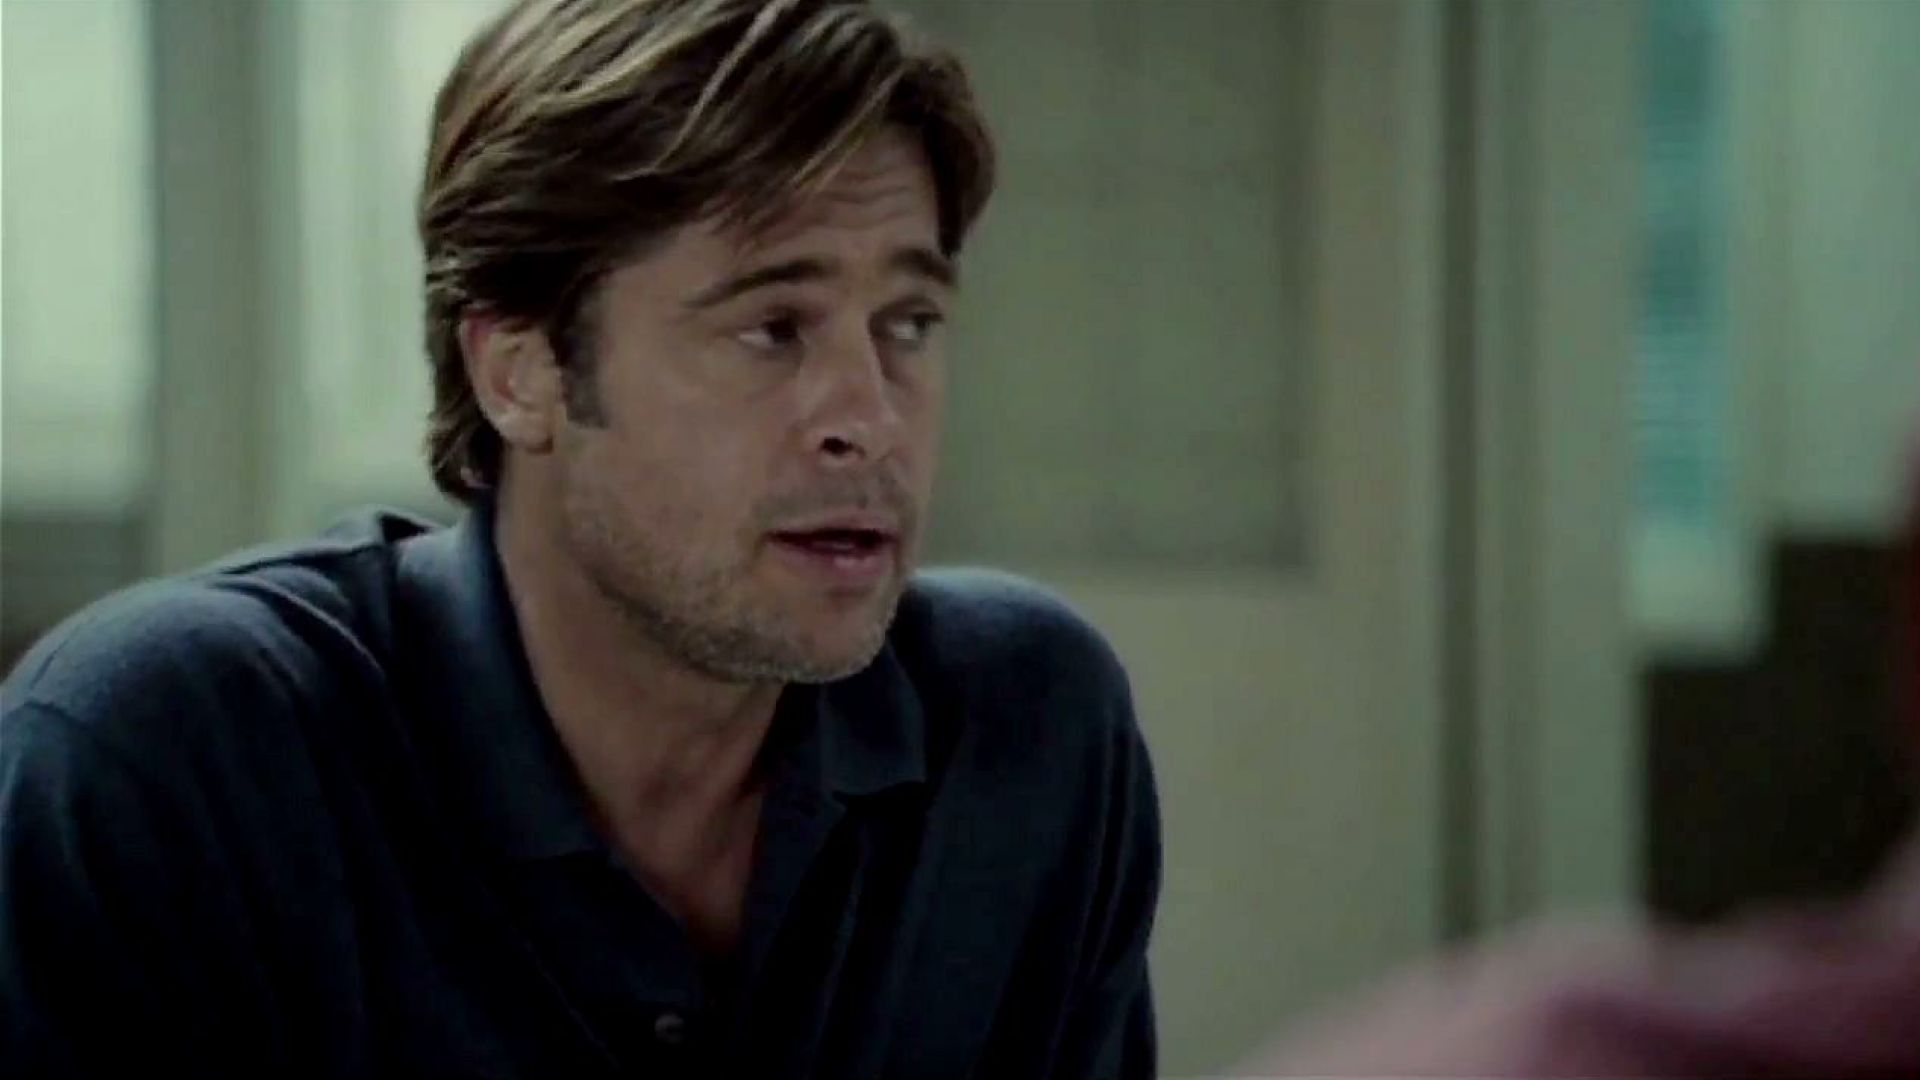 What's The Problem? Pitt in Moneyball